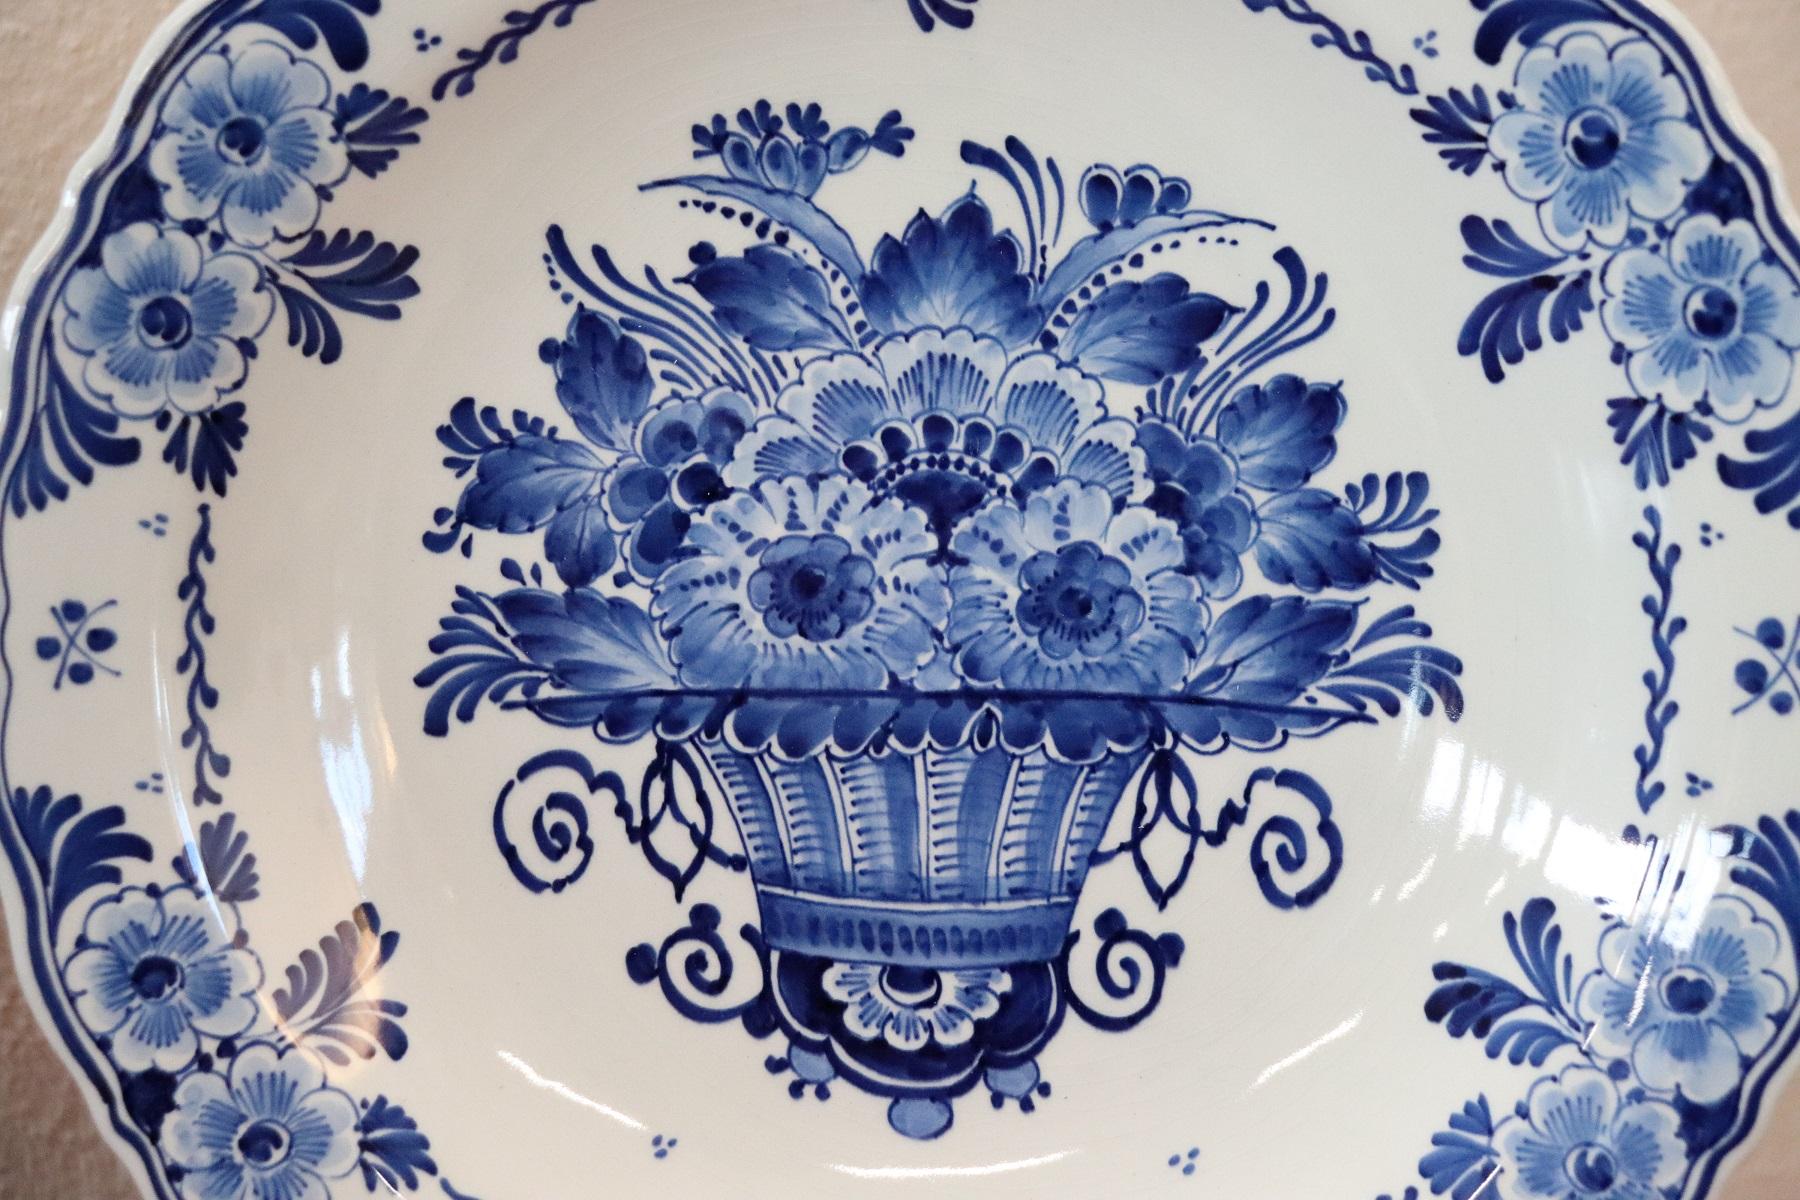 Unknown 20th Century Holland Ceramic Platters with Blue Floreal Decorations by Delft